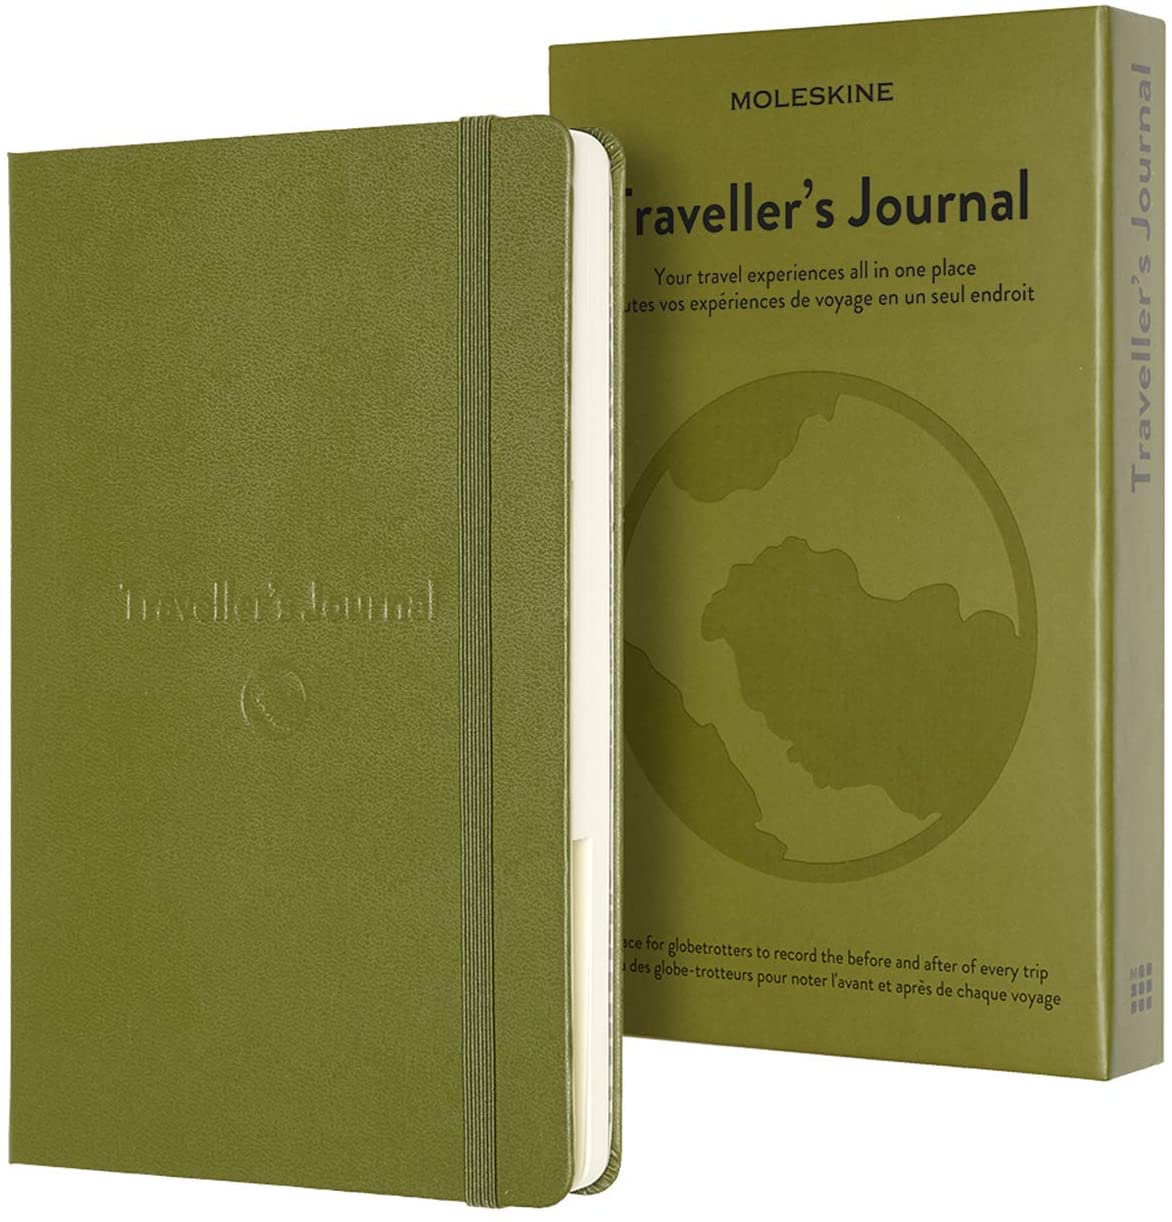 Moleskine - Travel Journal, Theme Notebook - Hardcover Notebook to Organise and Remember Your Travels - Large Size 13 x 21 cm - 400 Pages